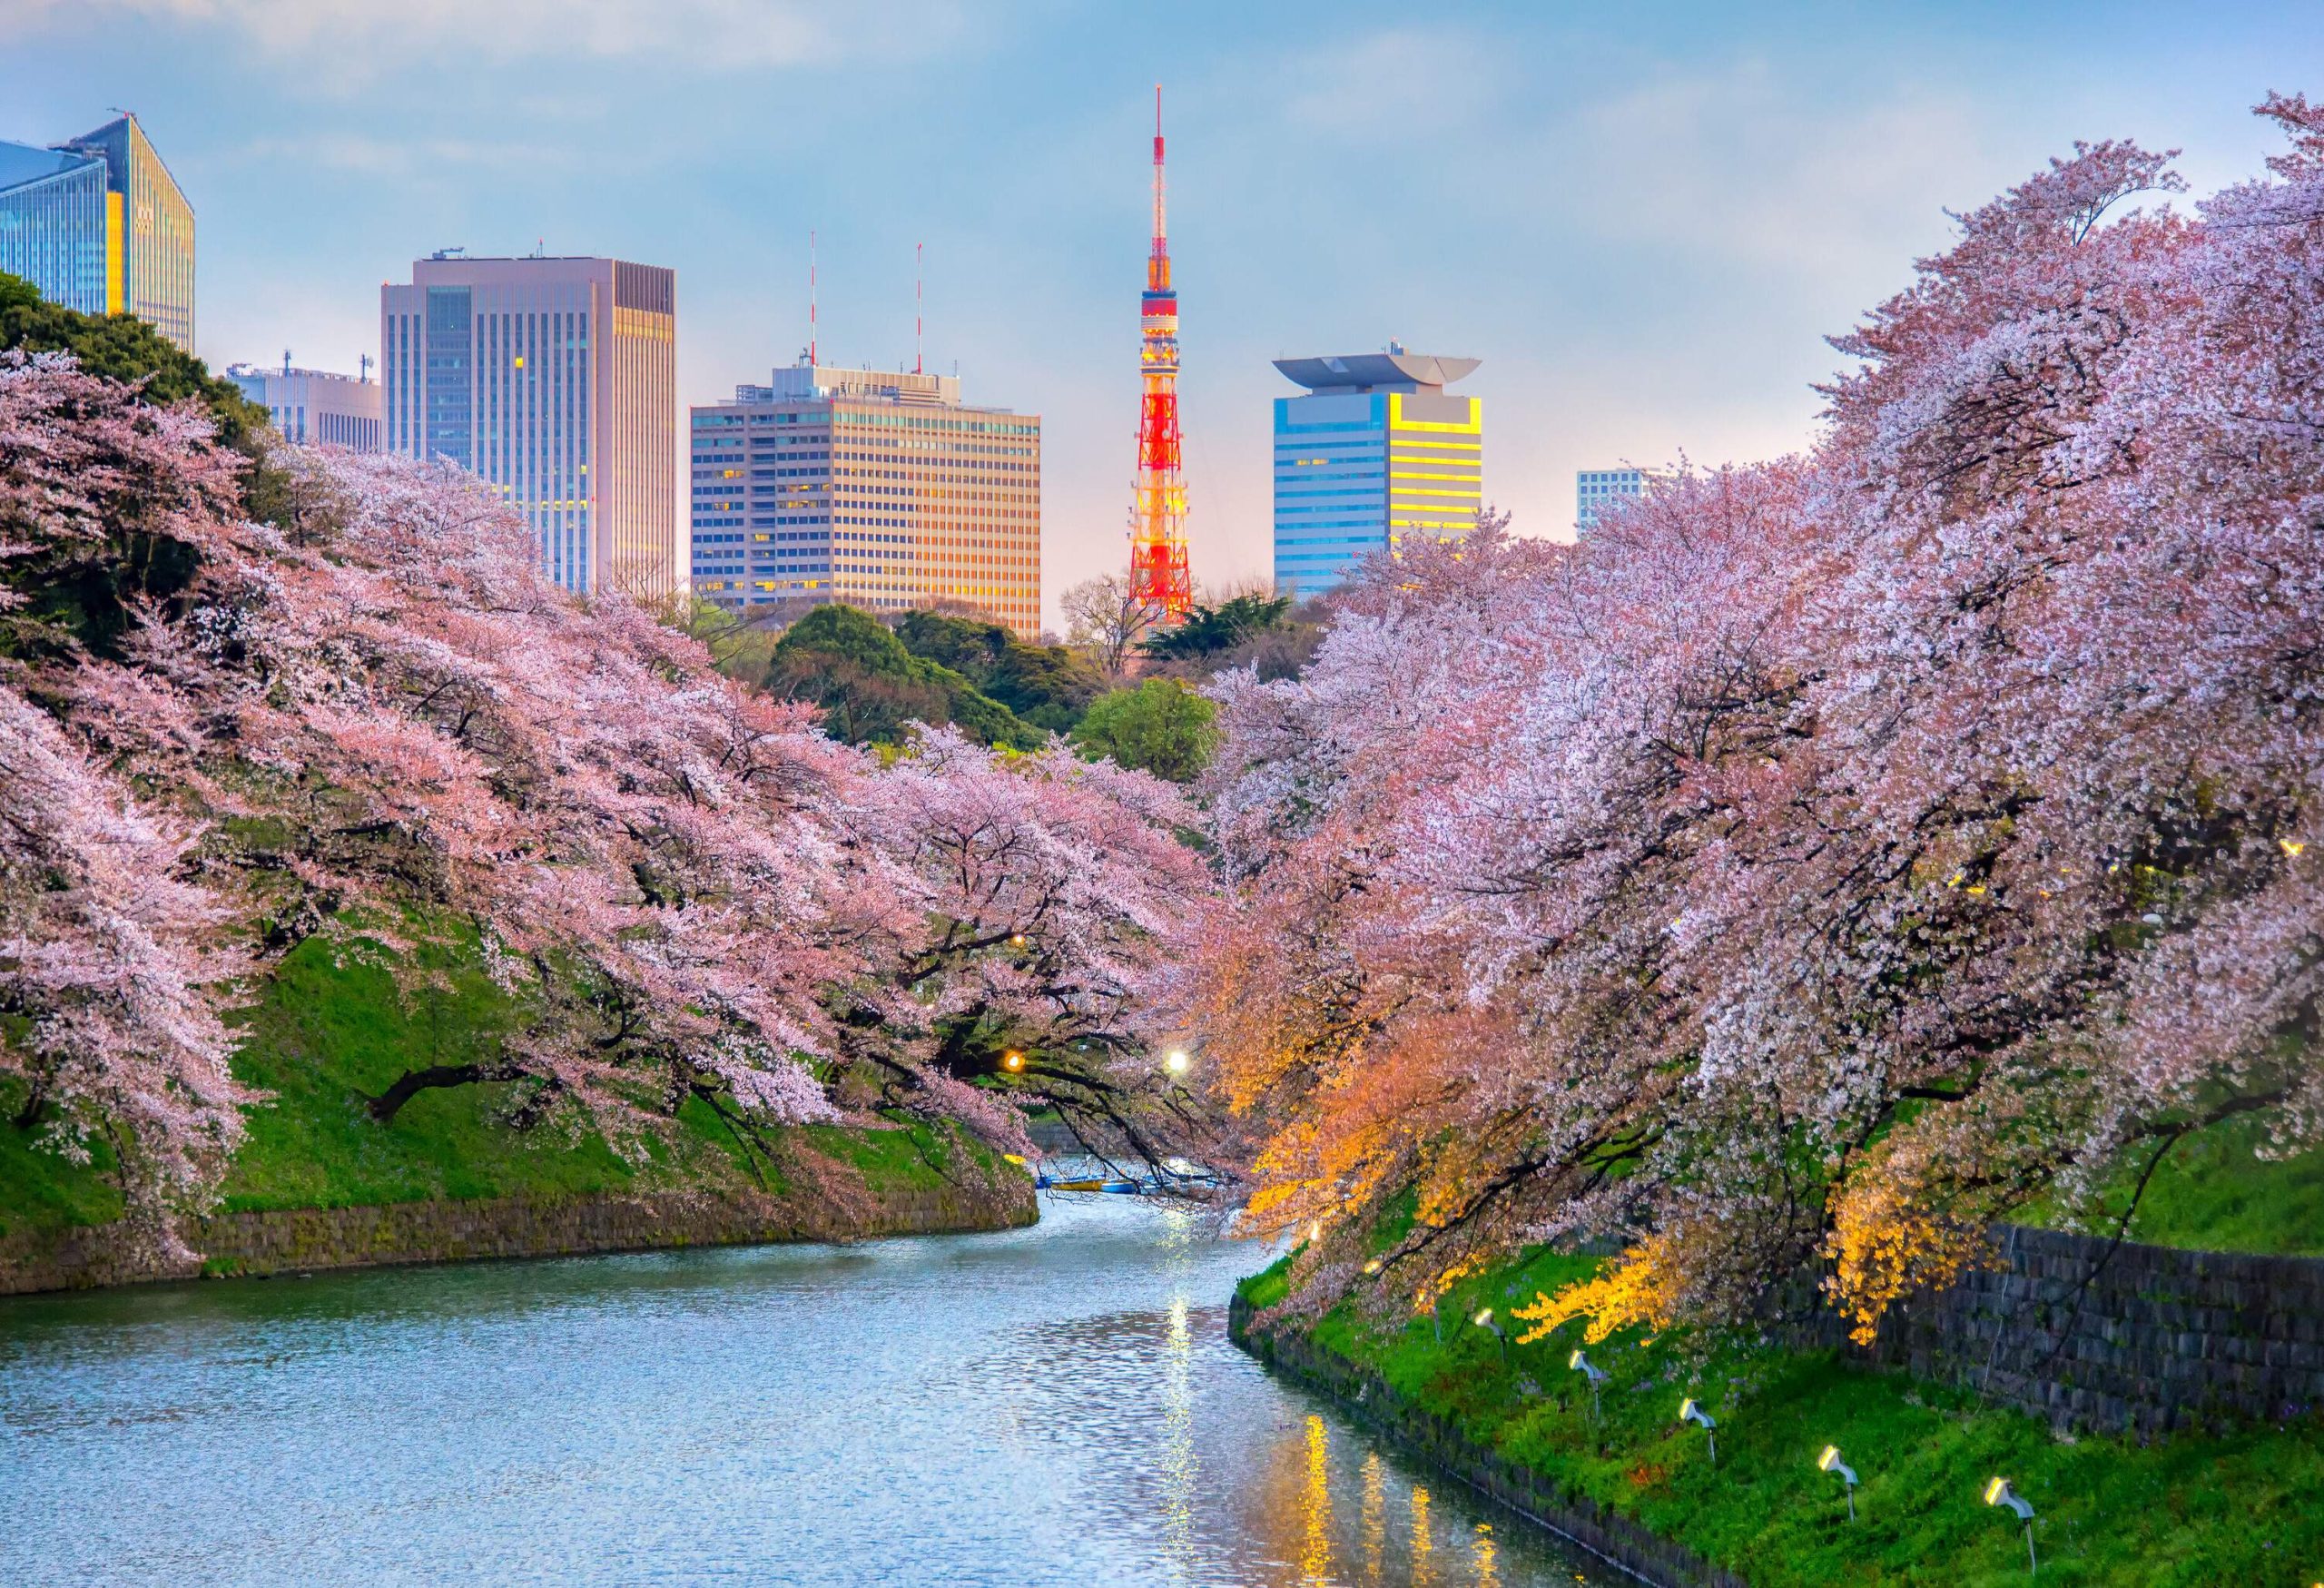 A palace moat meandering under the cherry blossom trees in full bloom against the tall buildings in the background.